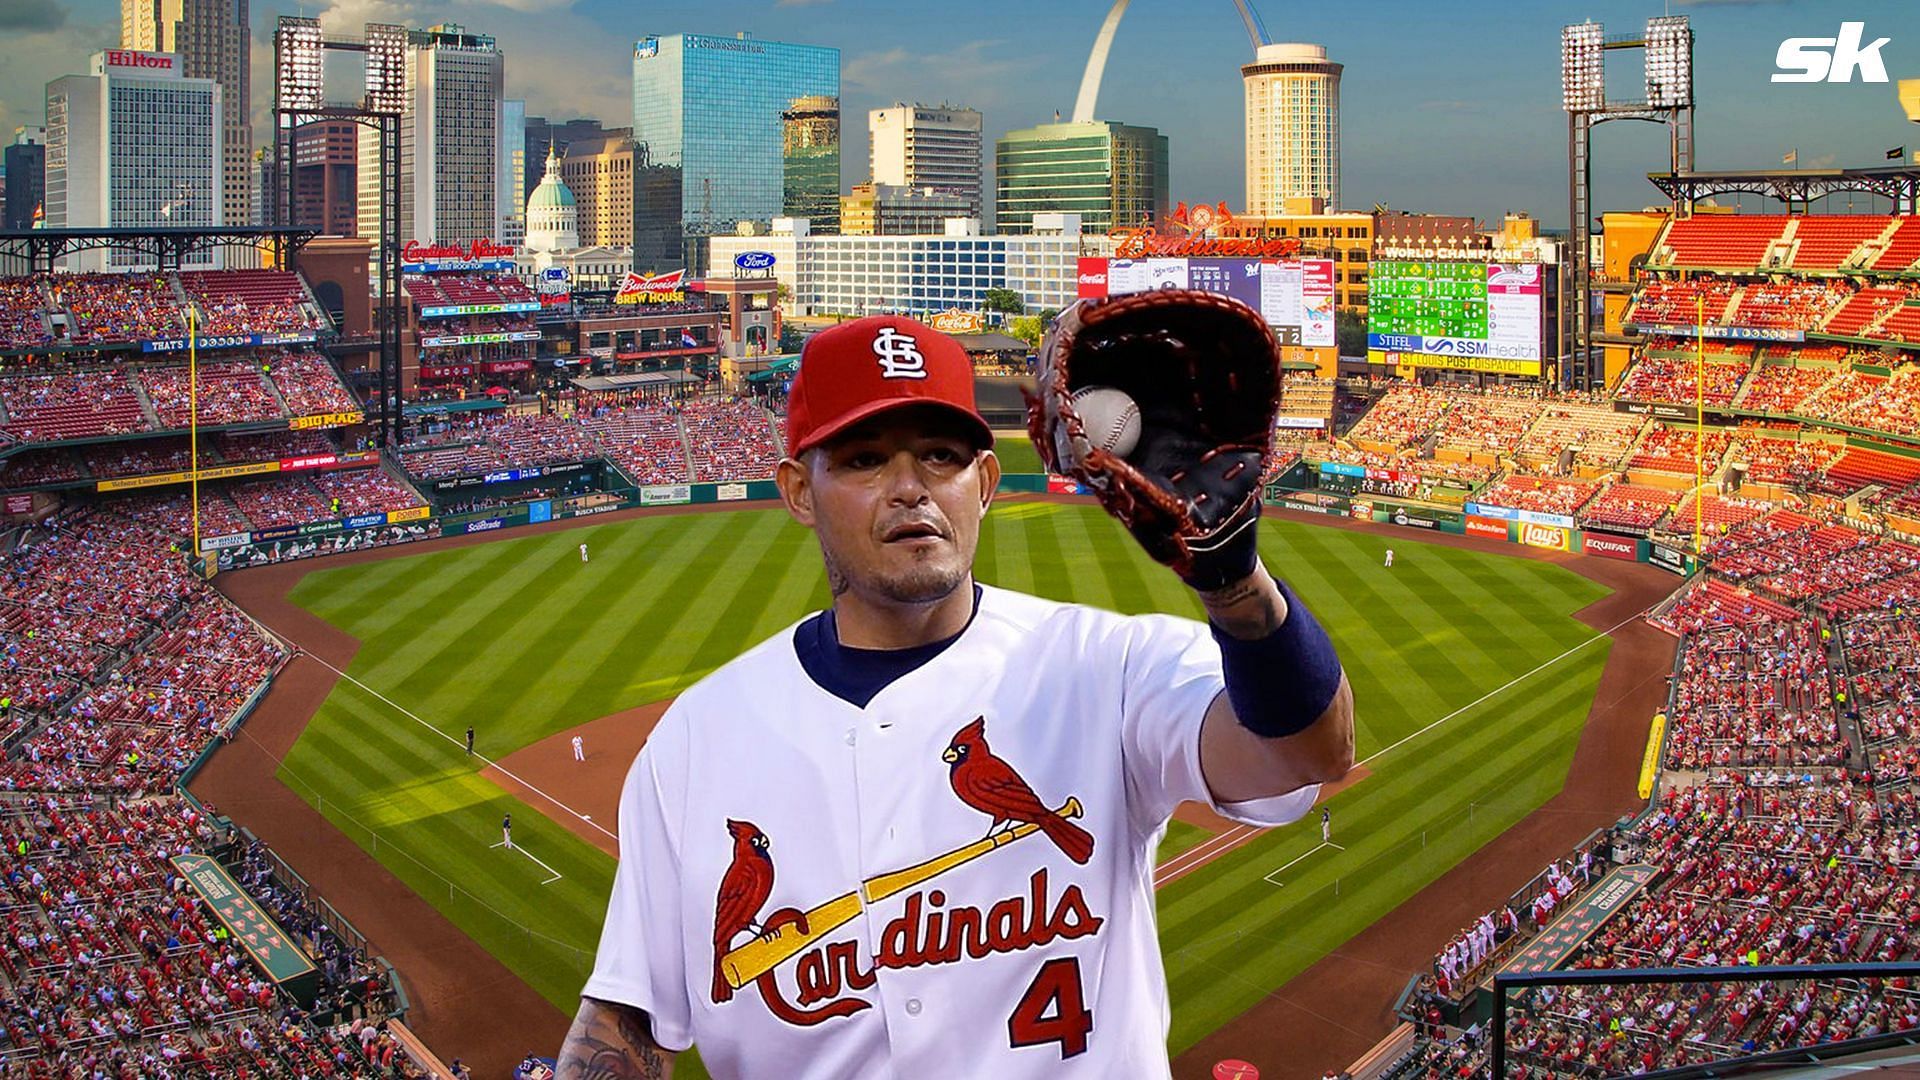 When will Yadier Molina return to the St. Louis Cardinals?